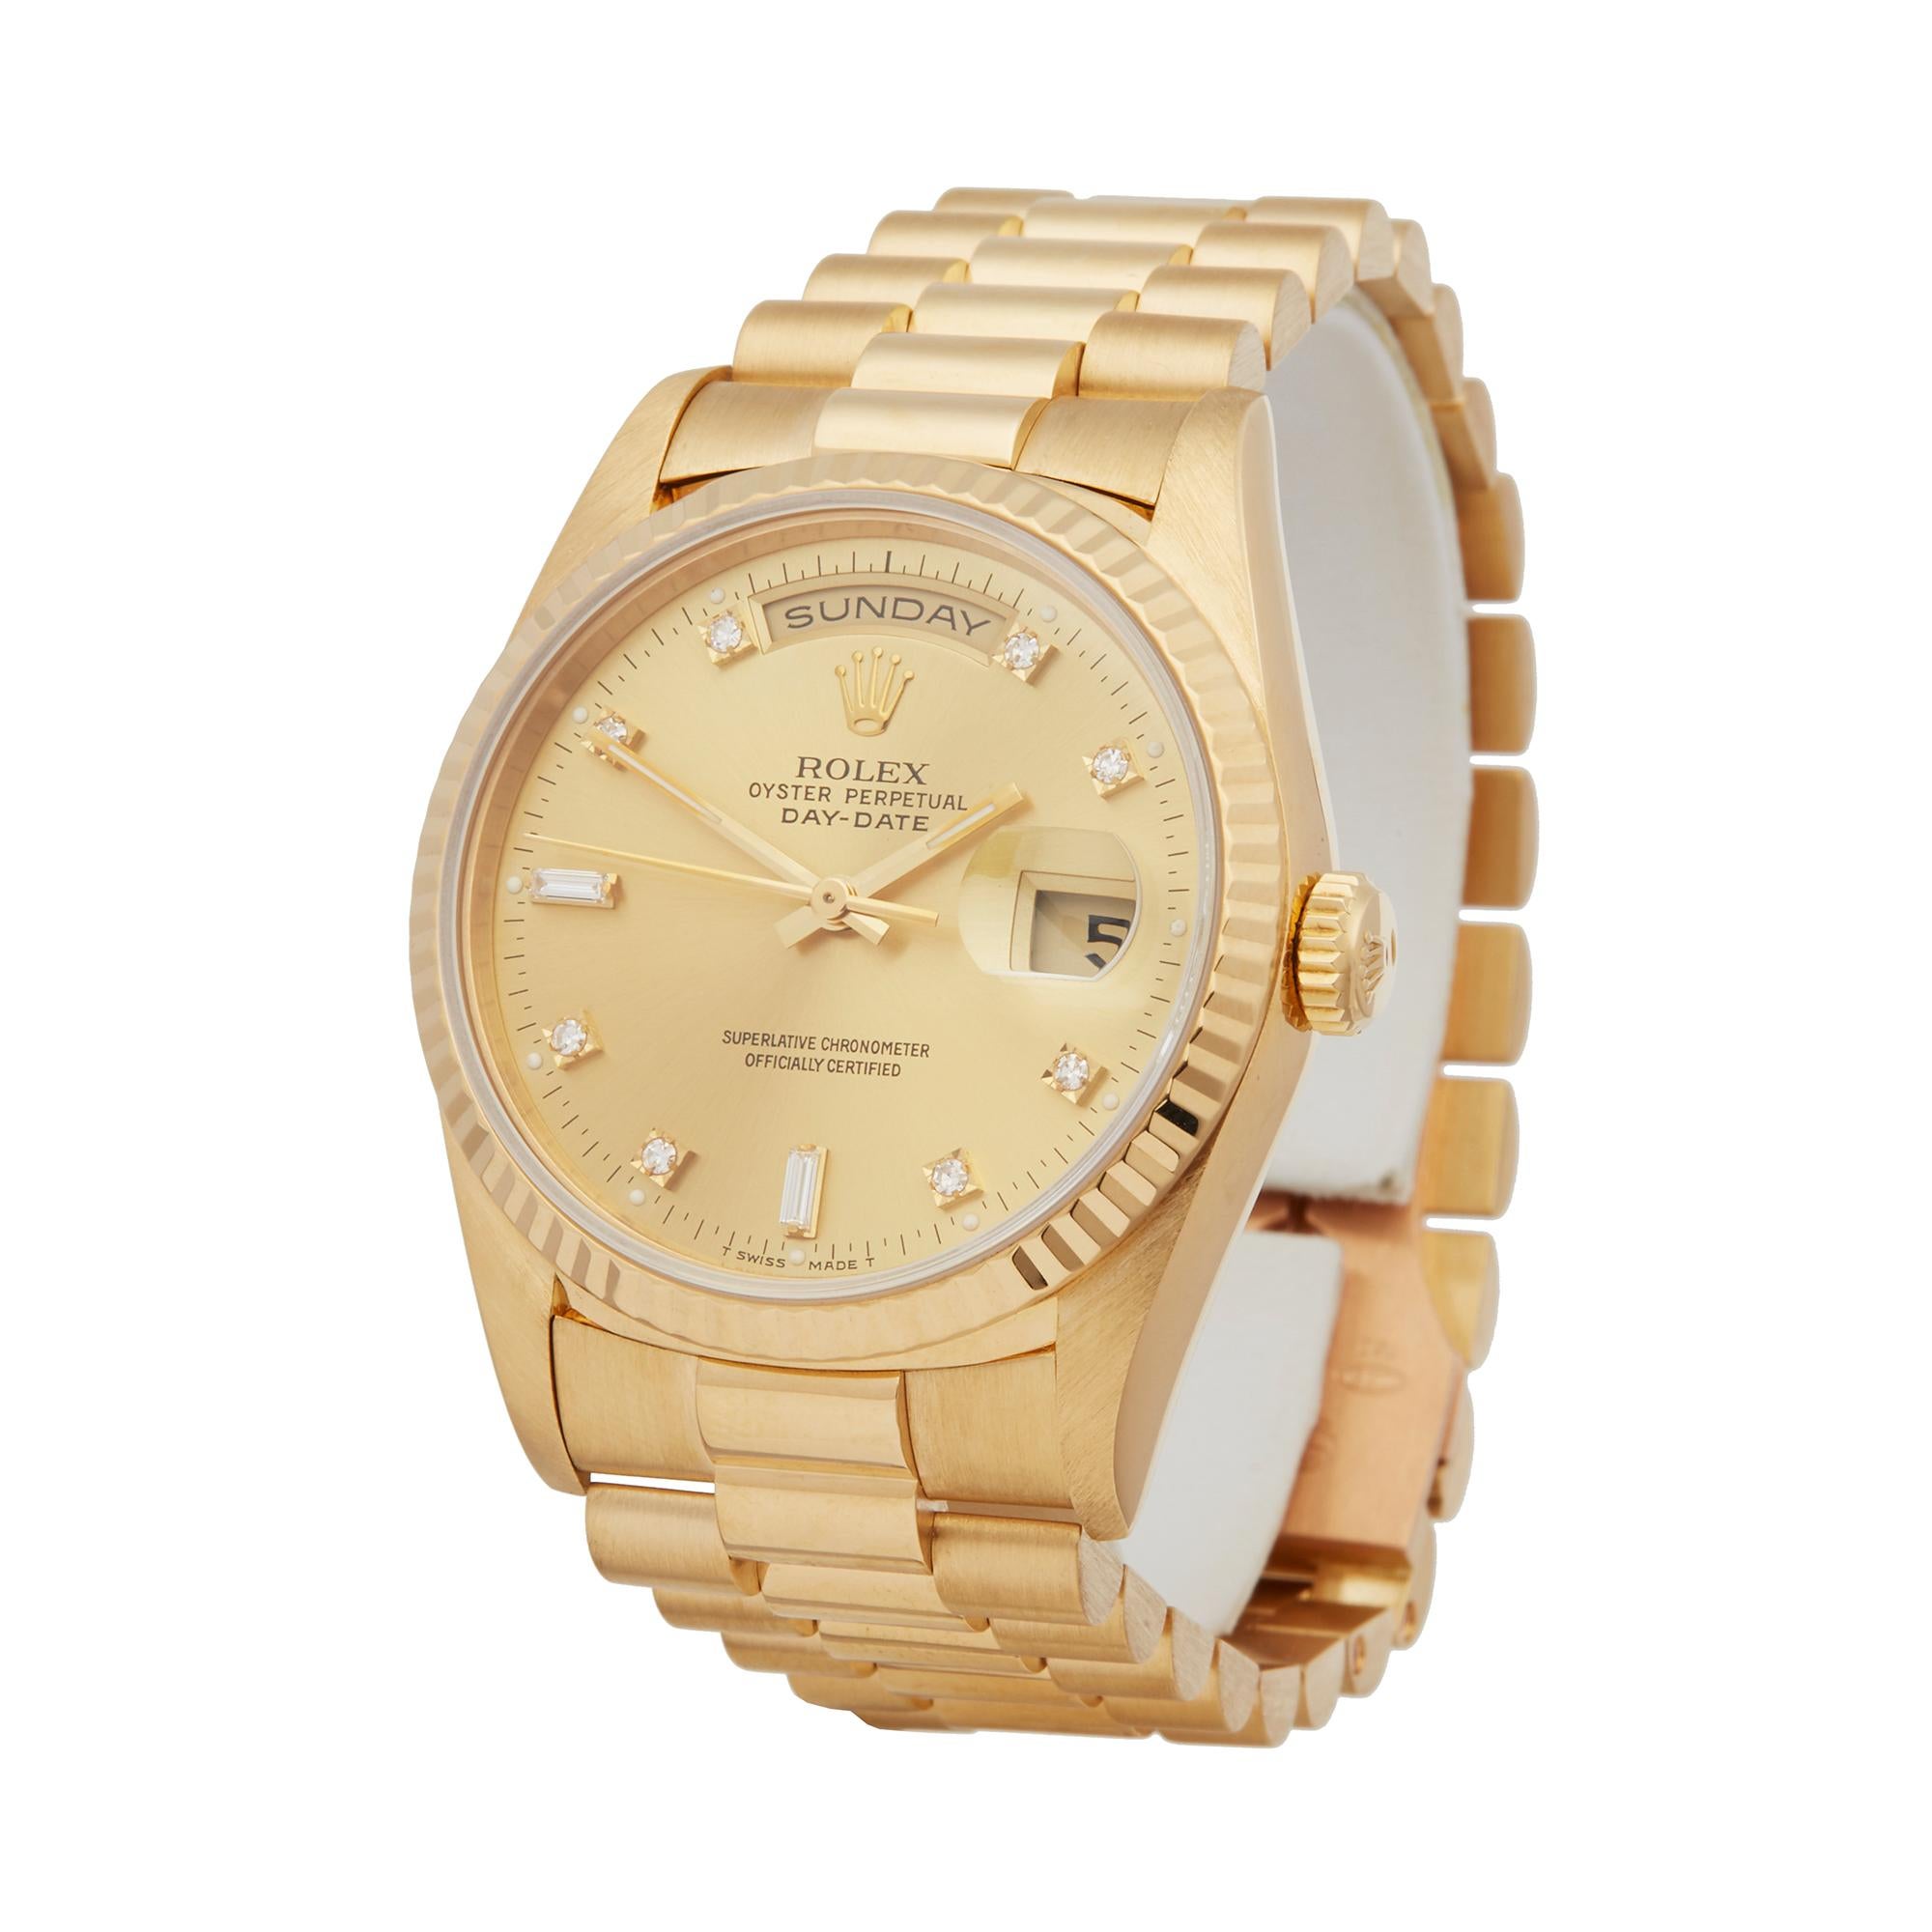 Reference: W5698
Manufacturer: Rolex
Model: Day-Date
Model Reference: 18238
Age: 22nd April 1992
Gender: Men's
Box and Papers: Box and Guarantee
Dial: Champagne Diamond Markers
Glass: Sapphire Crystal
Movement: Automatic
Water Resistance: To